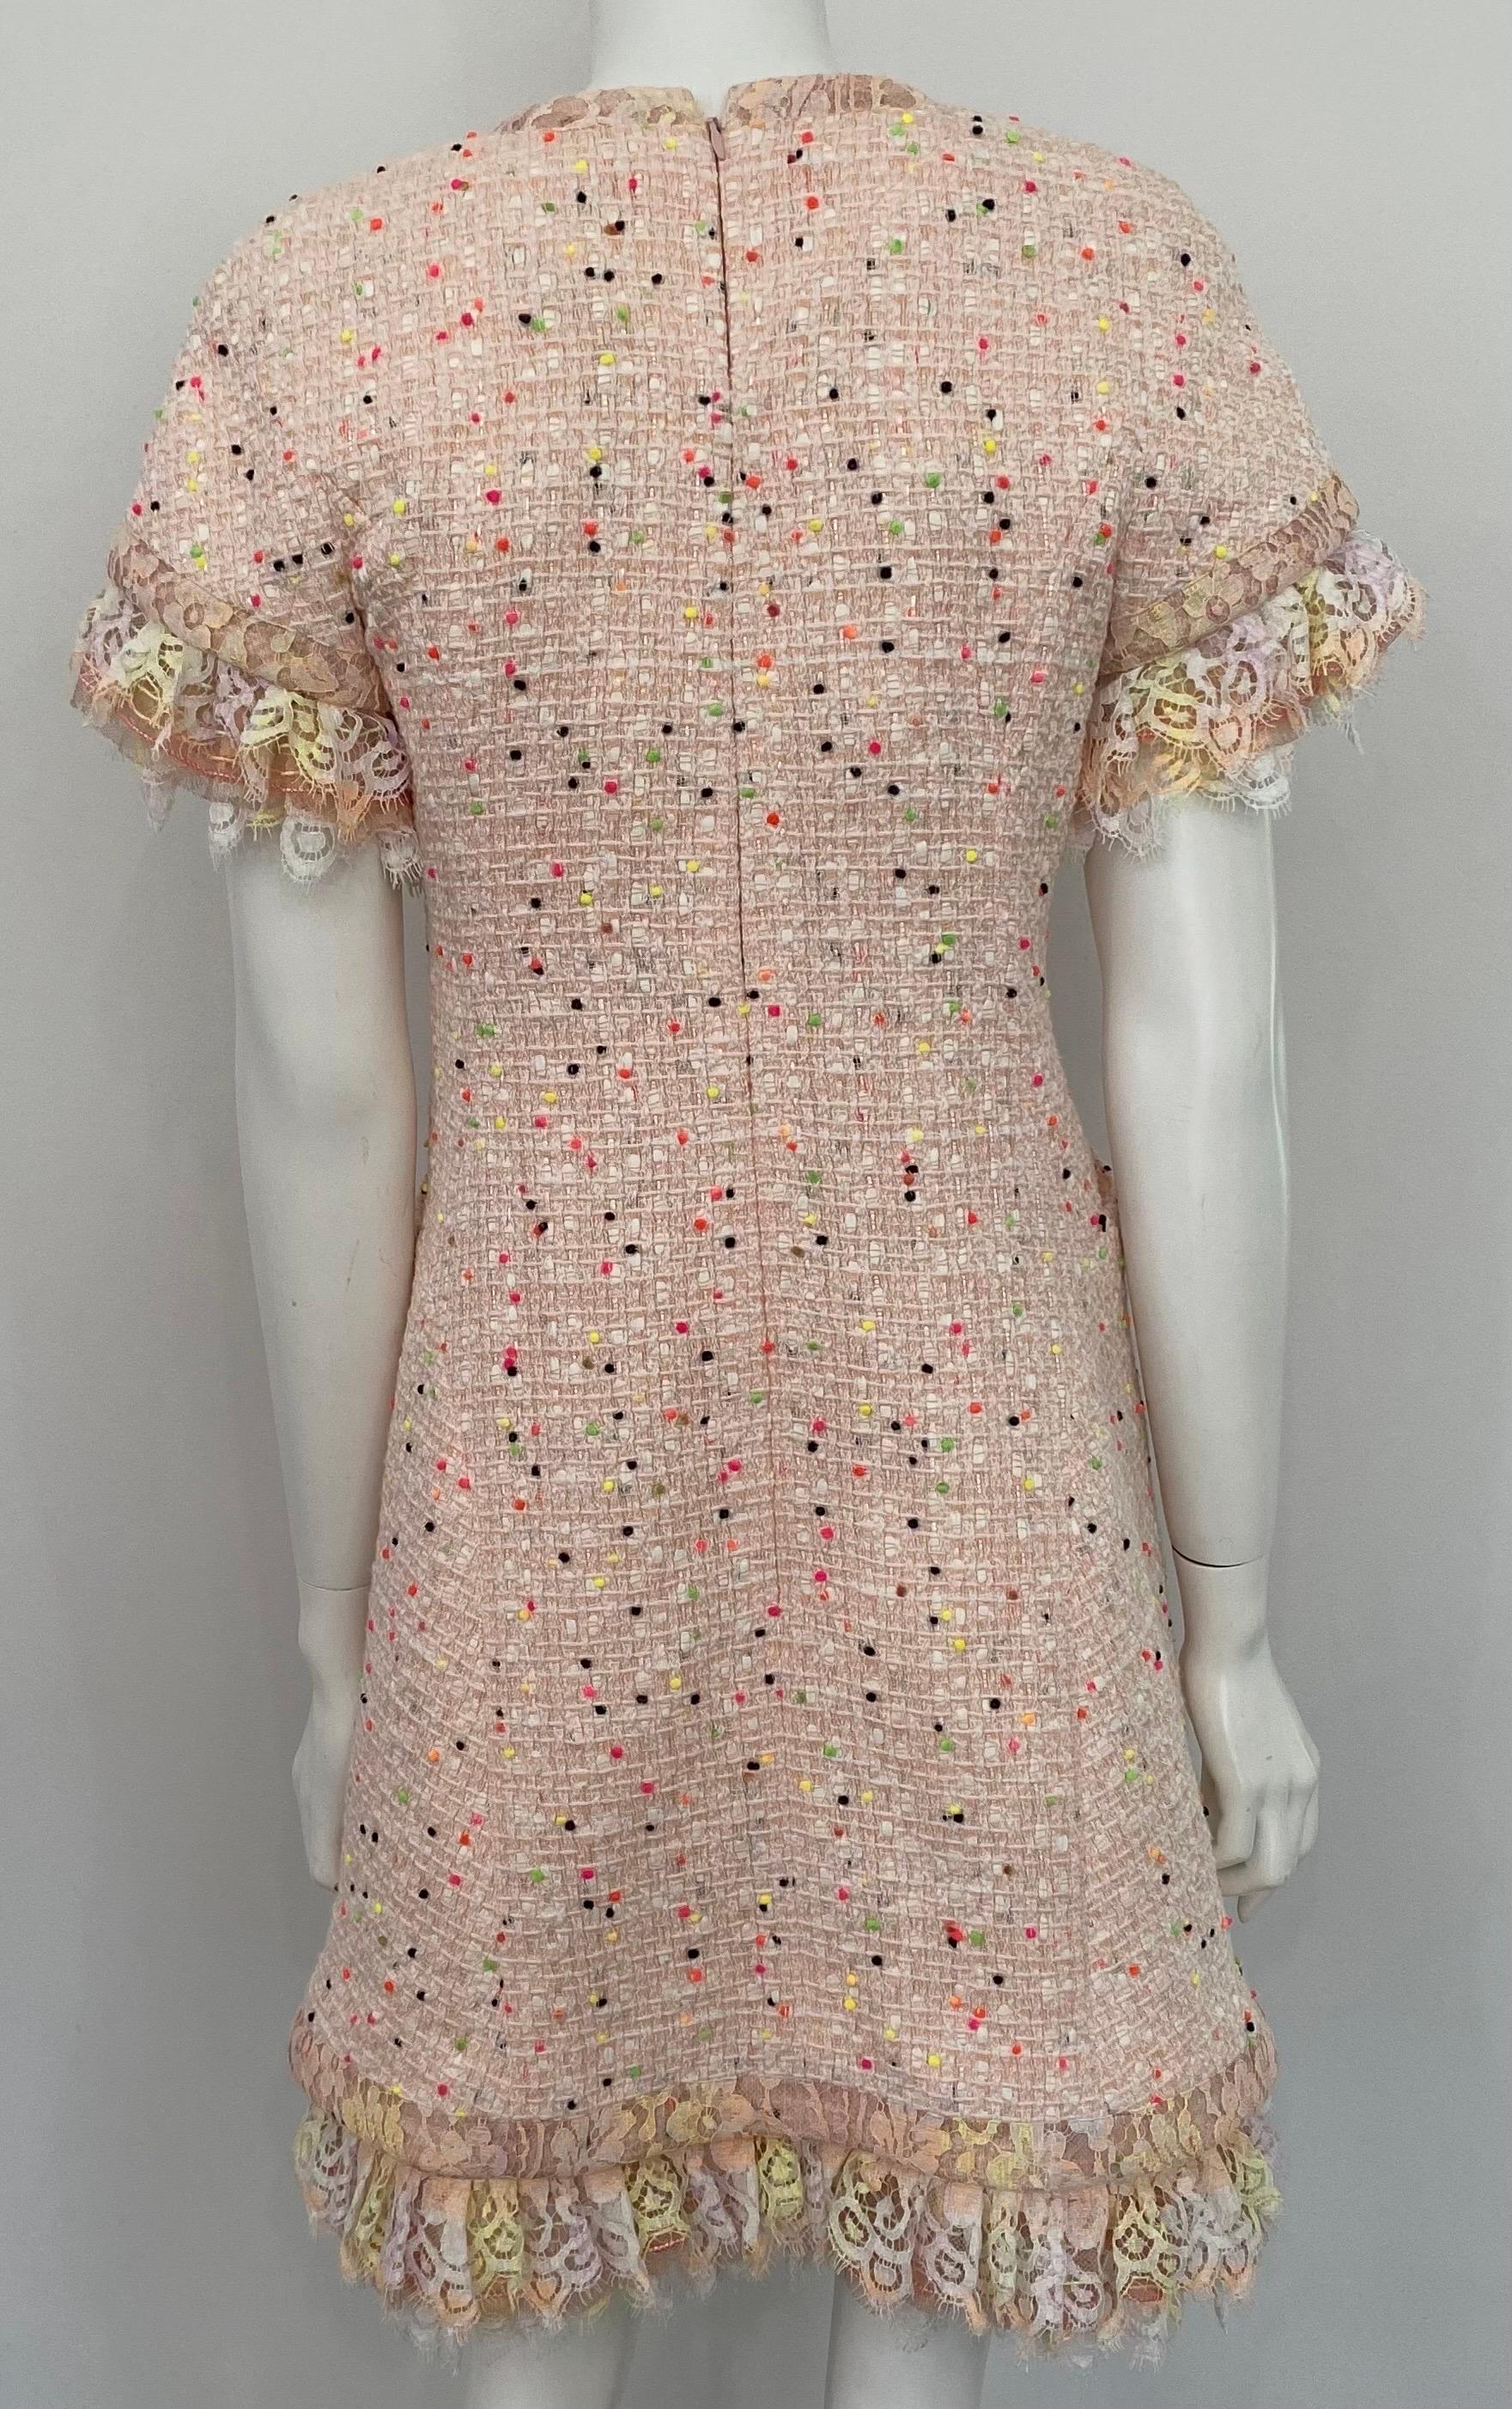 Chanel Peach and multi dot tweed Dress with removable lace detail - Sz 36 2